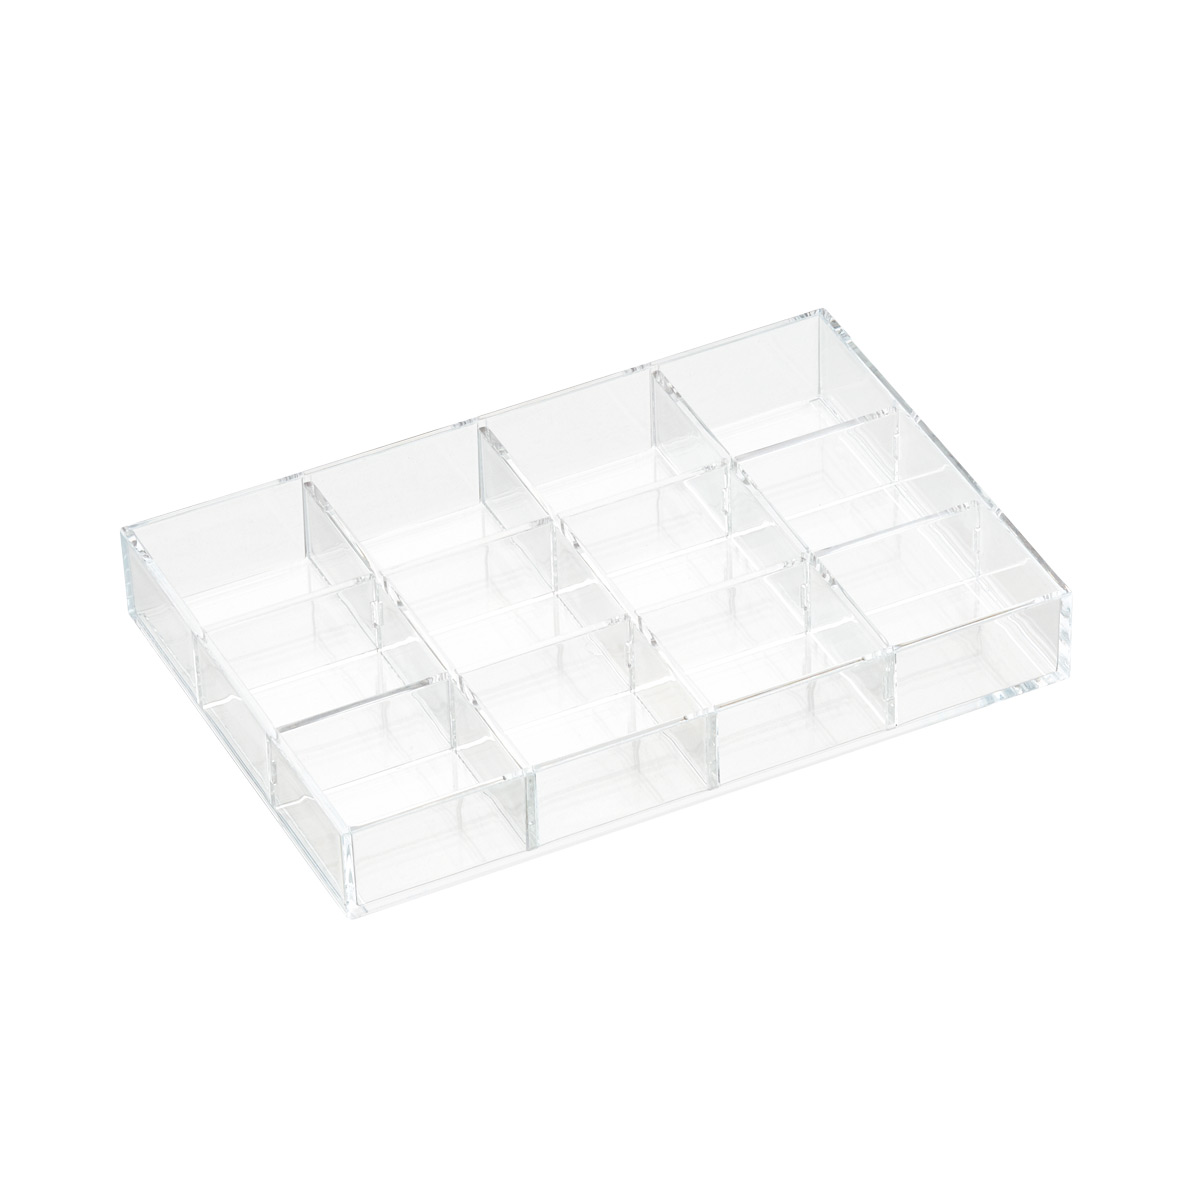 https://www.containerstore.com/catalogimages/336340/10050370-acrylic-adjustable-stacking.jpg